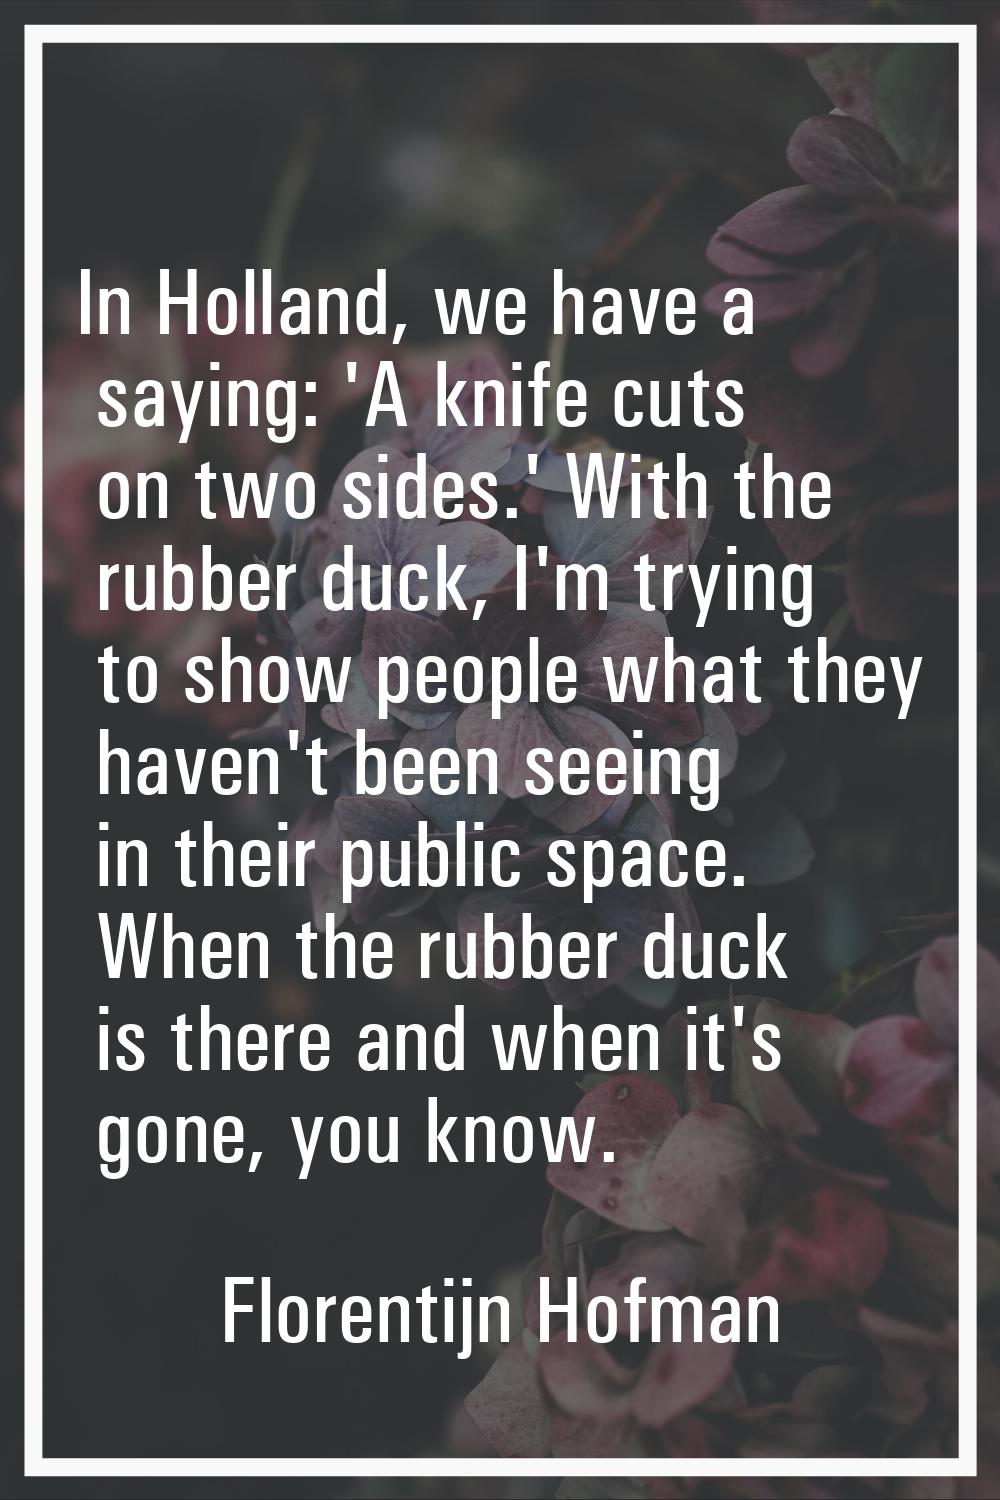 In Holland, we have a saying: 'A knife cuts on two sides.' With the rubber duck, I'm trying to show